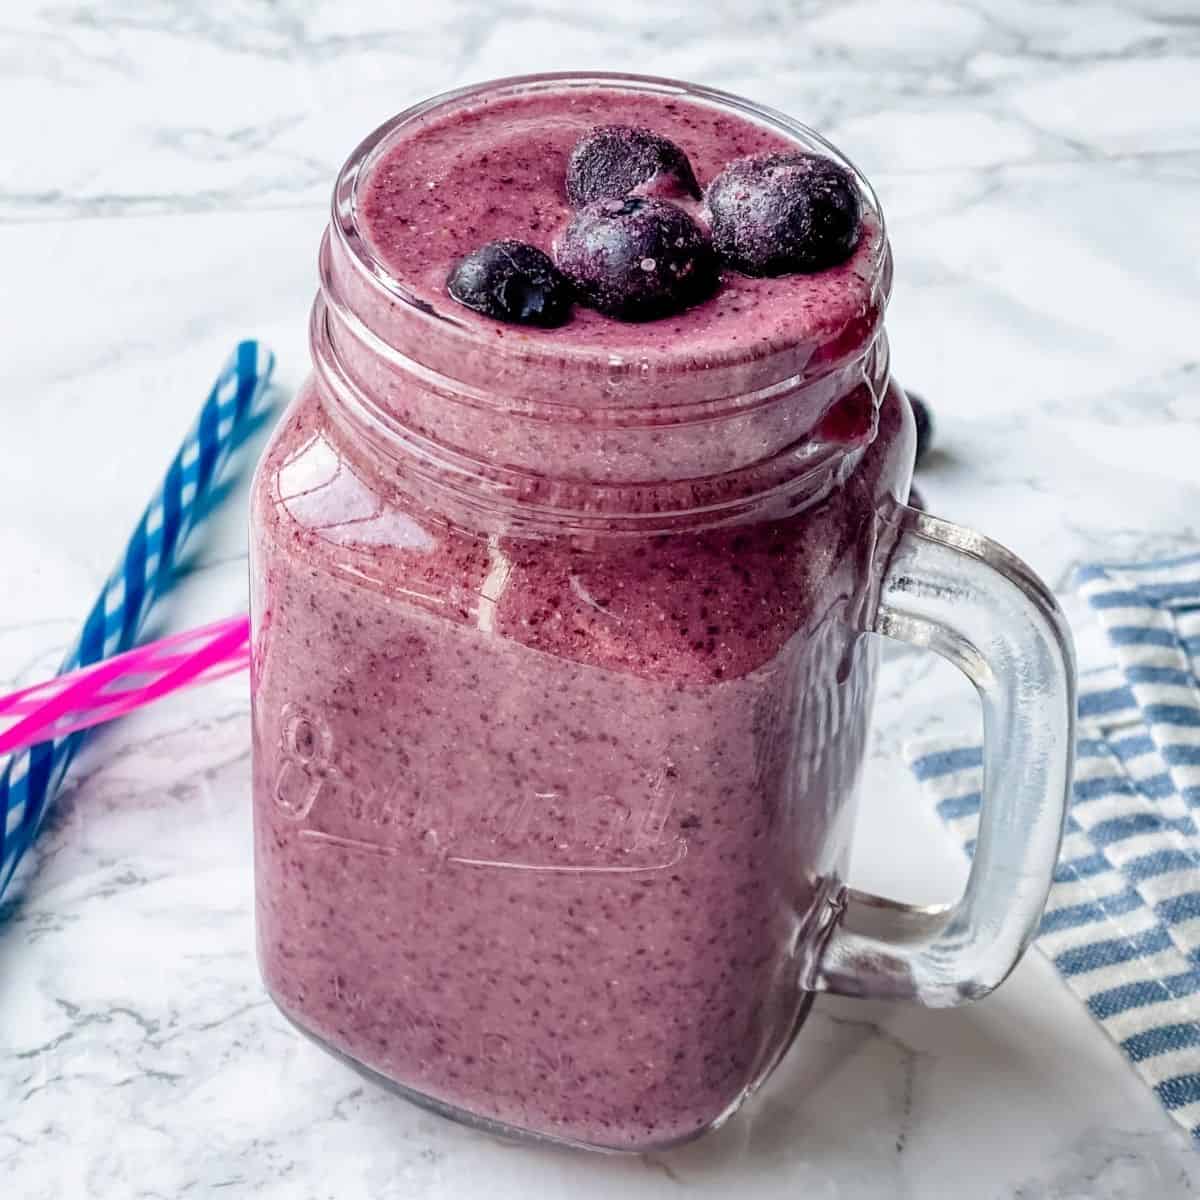 blueberry smoothie recipe in a mason jar with straws on the side